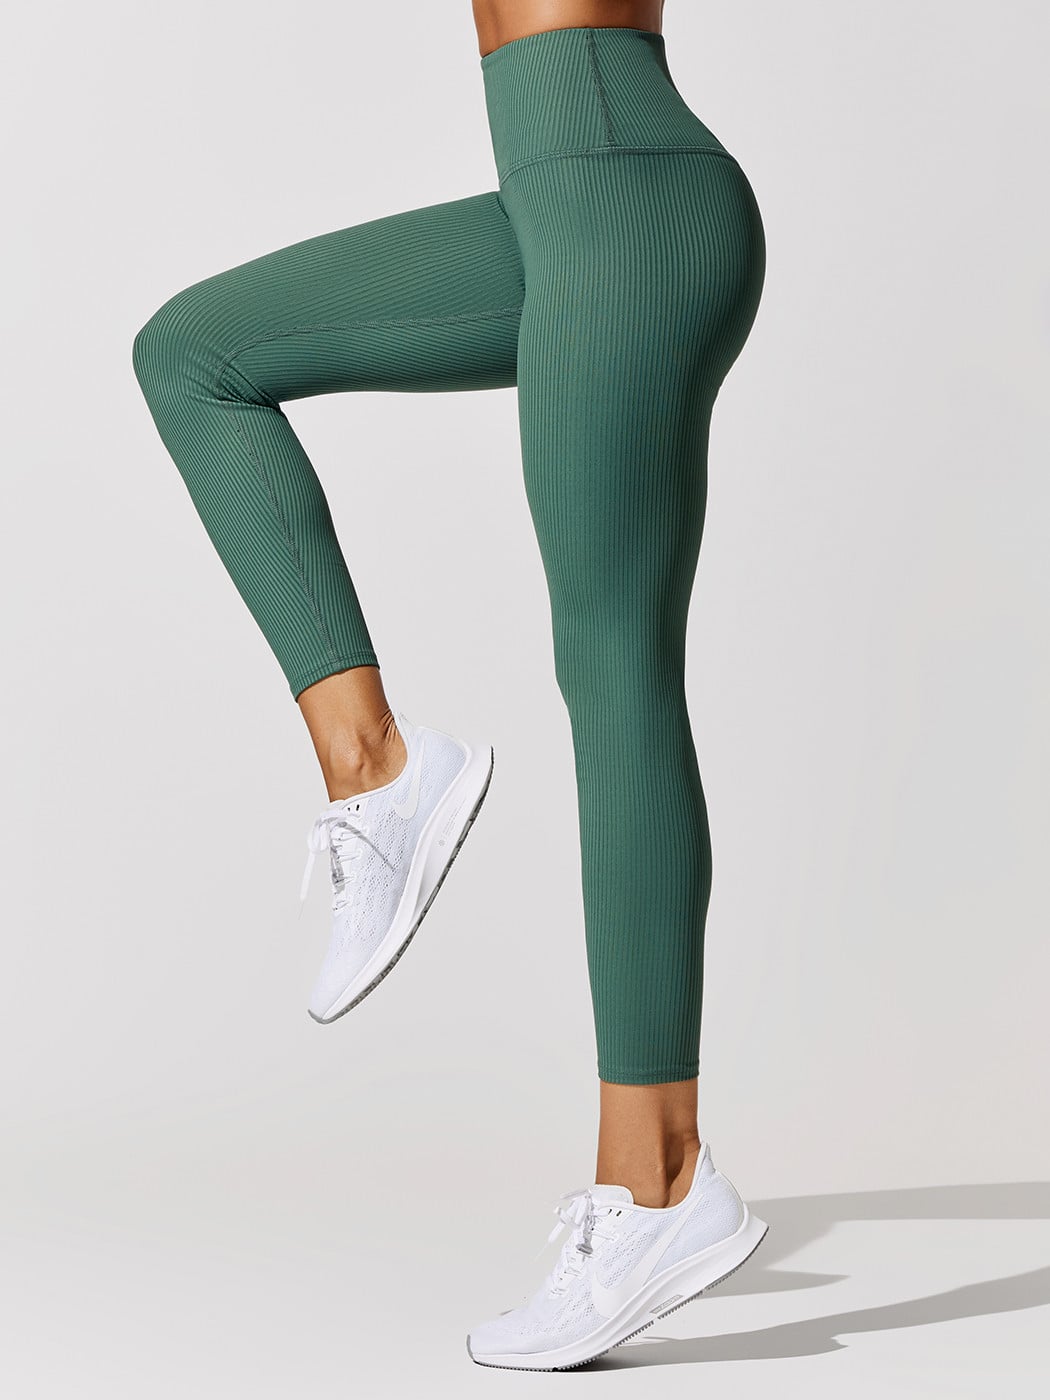 carbon38 Ribbed Athletic Leggings for Women